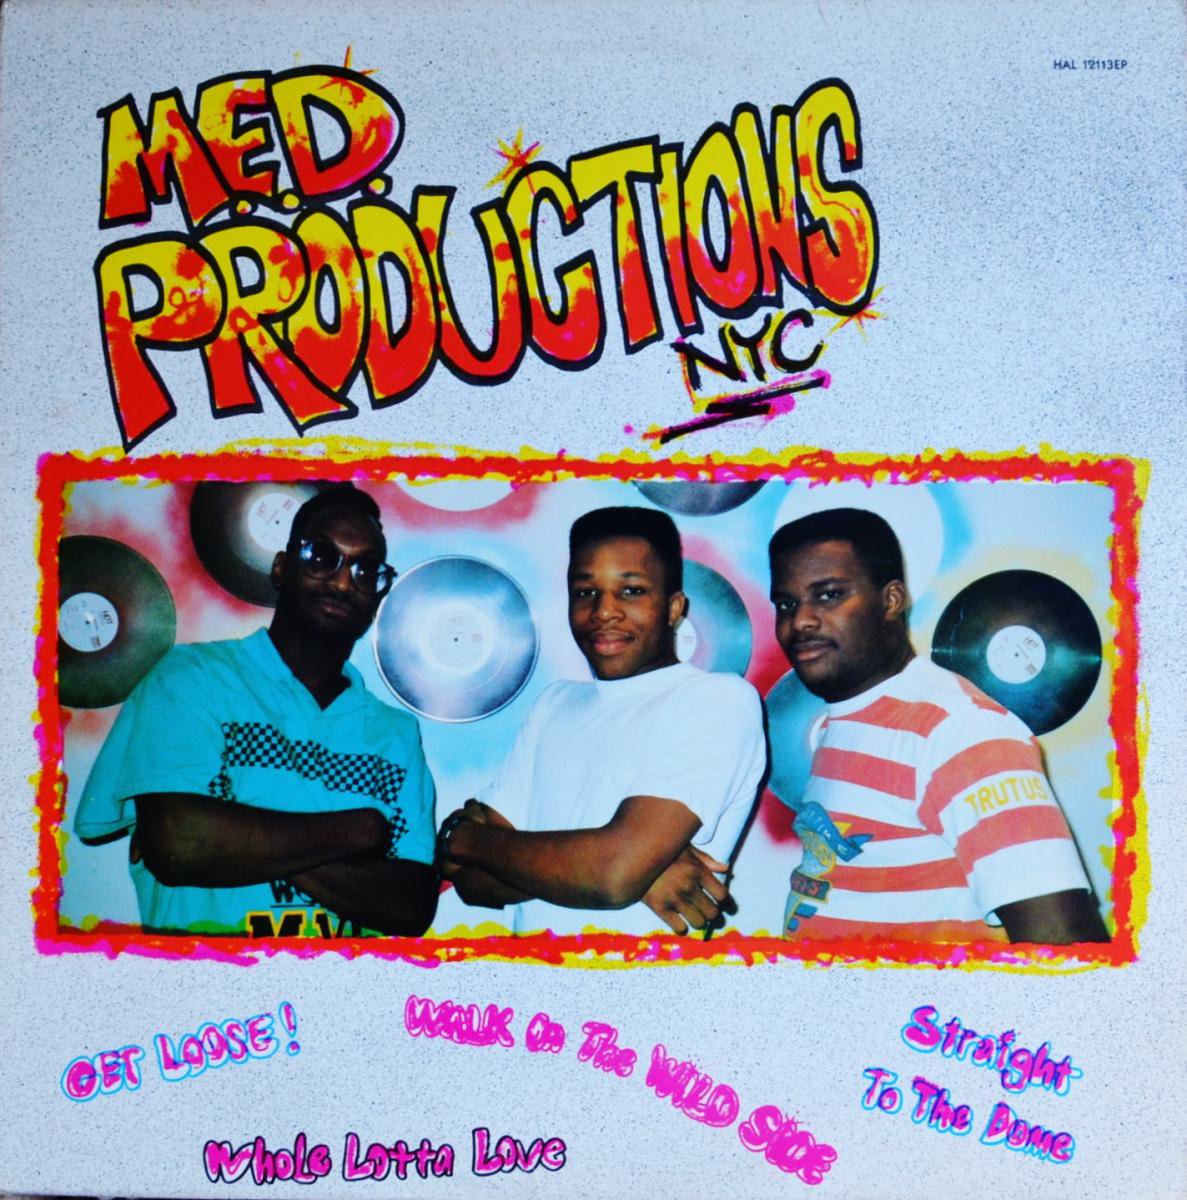 M.E.D.PRODUCTIONS,NYC / GET LOOSE (12